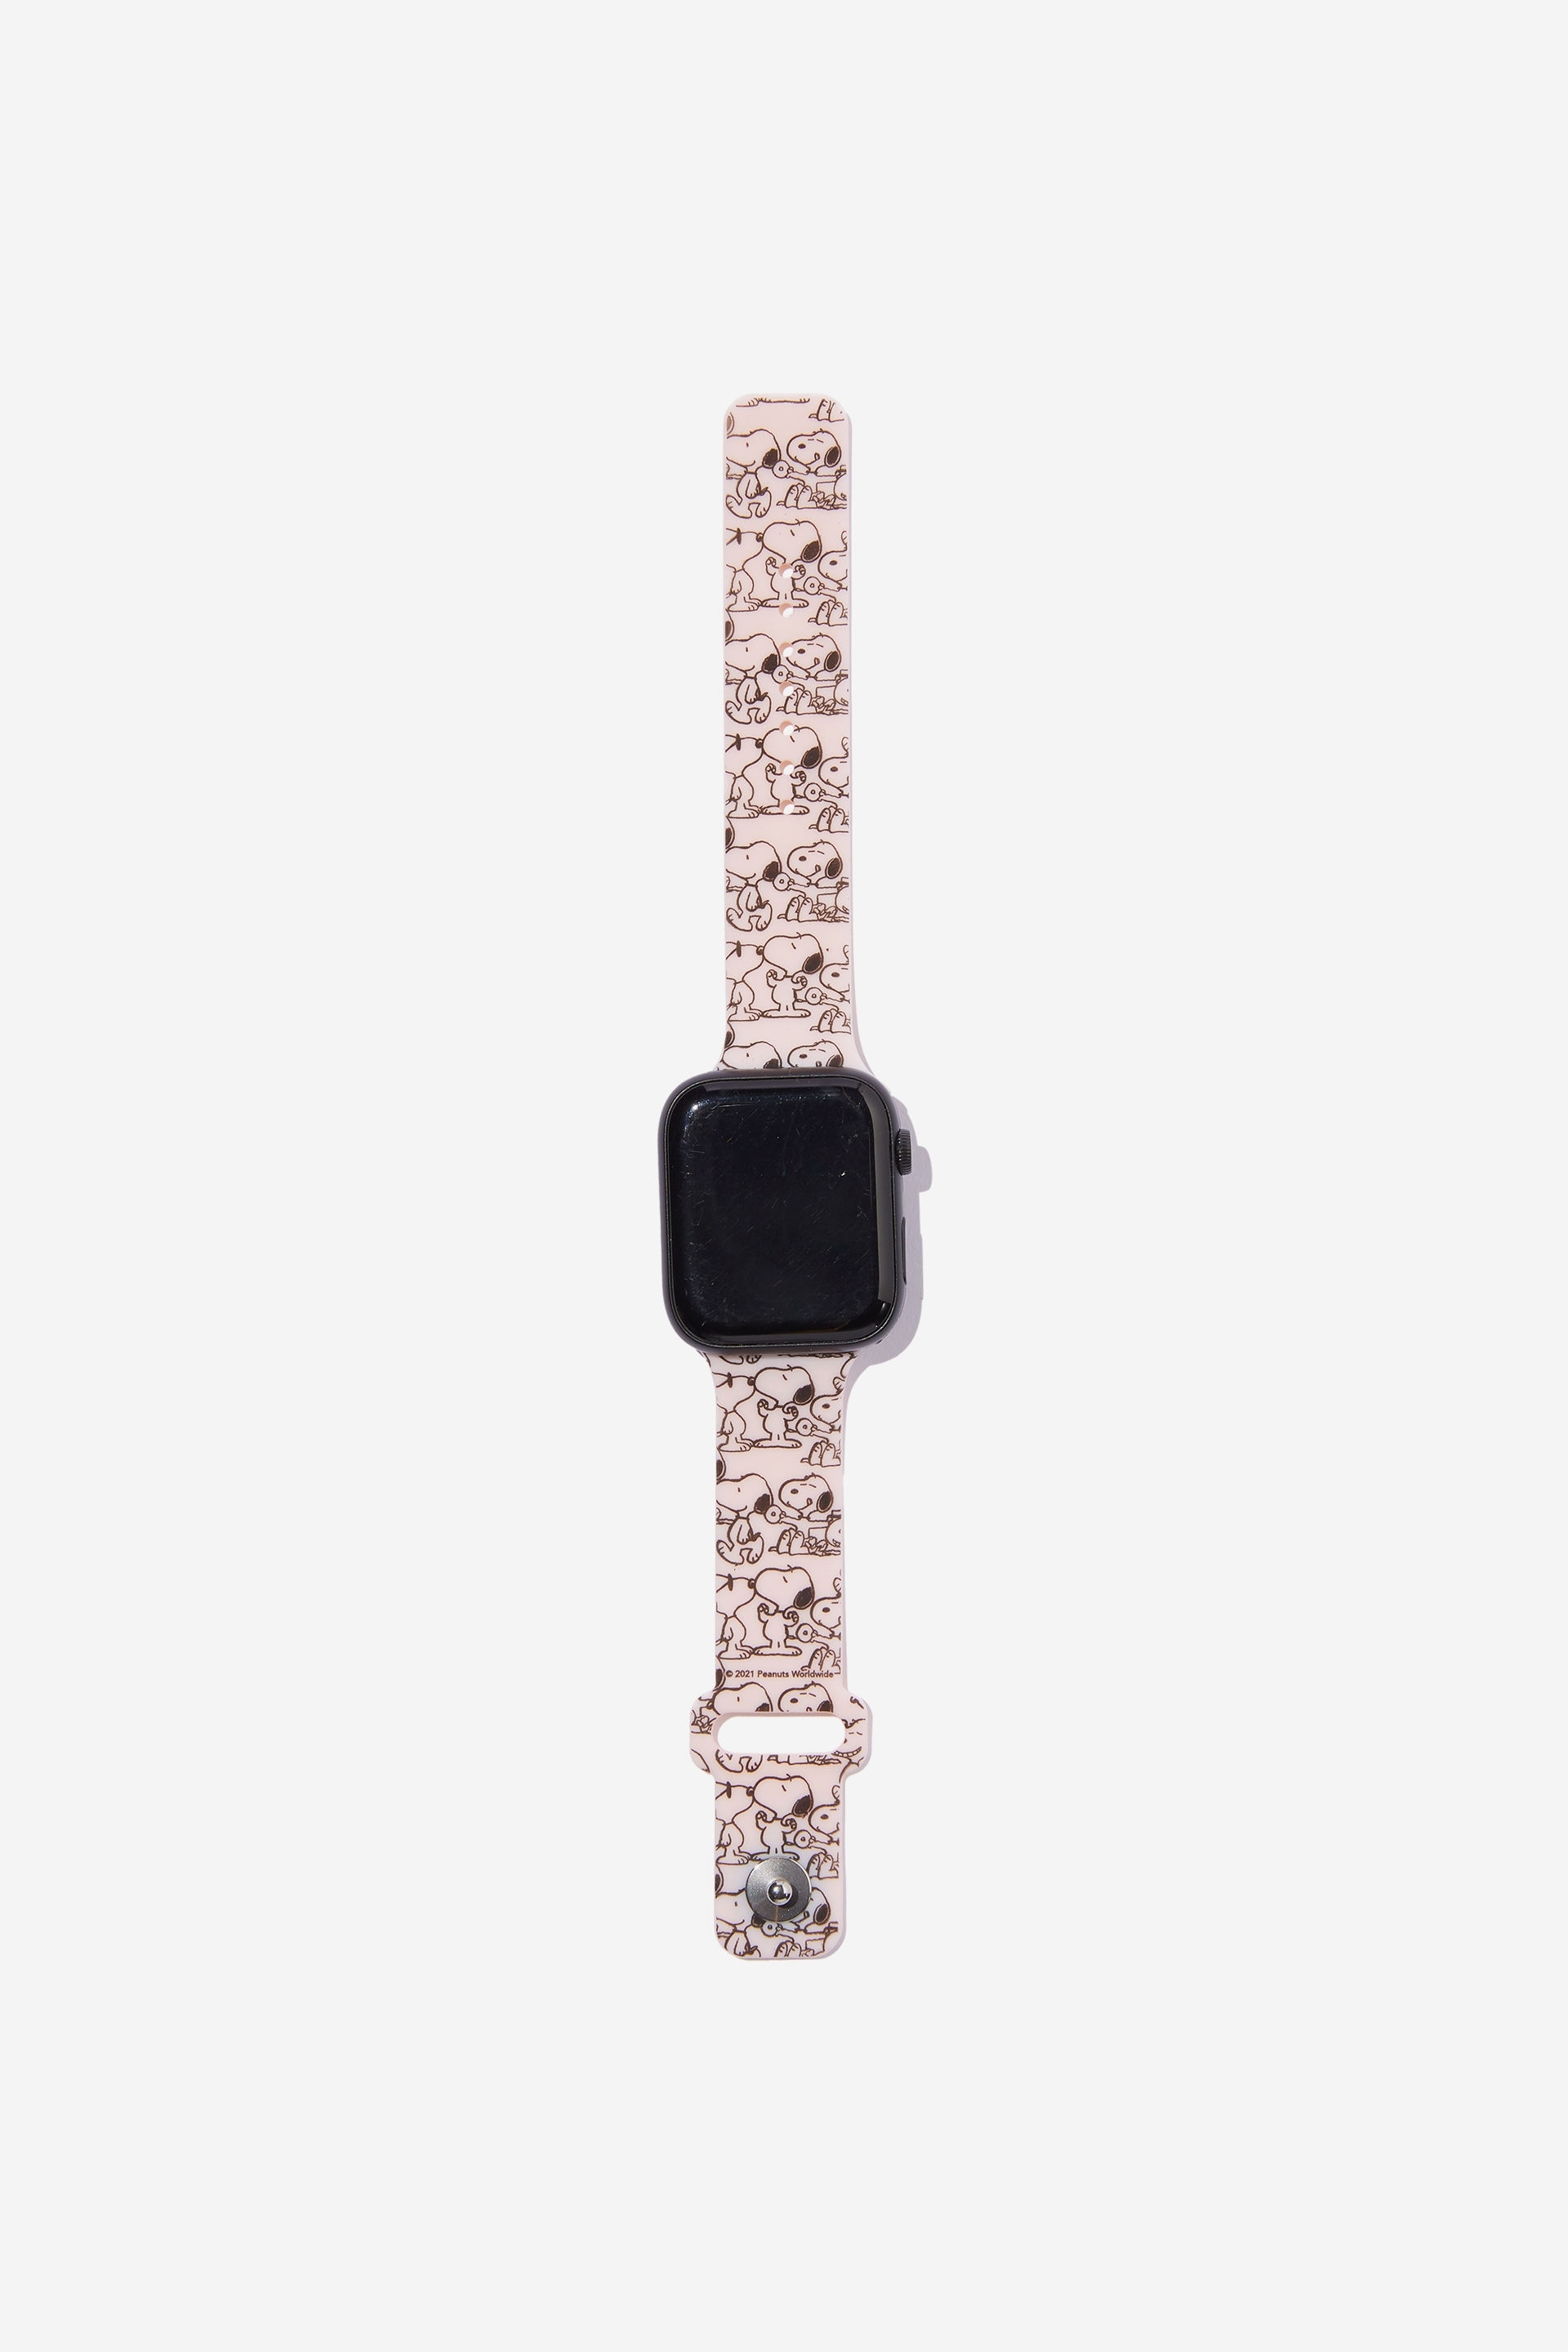 Typo - Peanuts Strapped Watch Strap - Lcn pea snoopy whisper pink